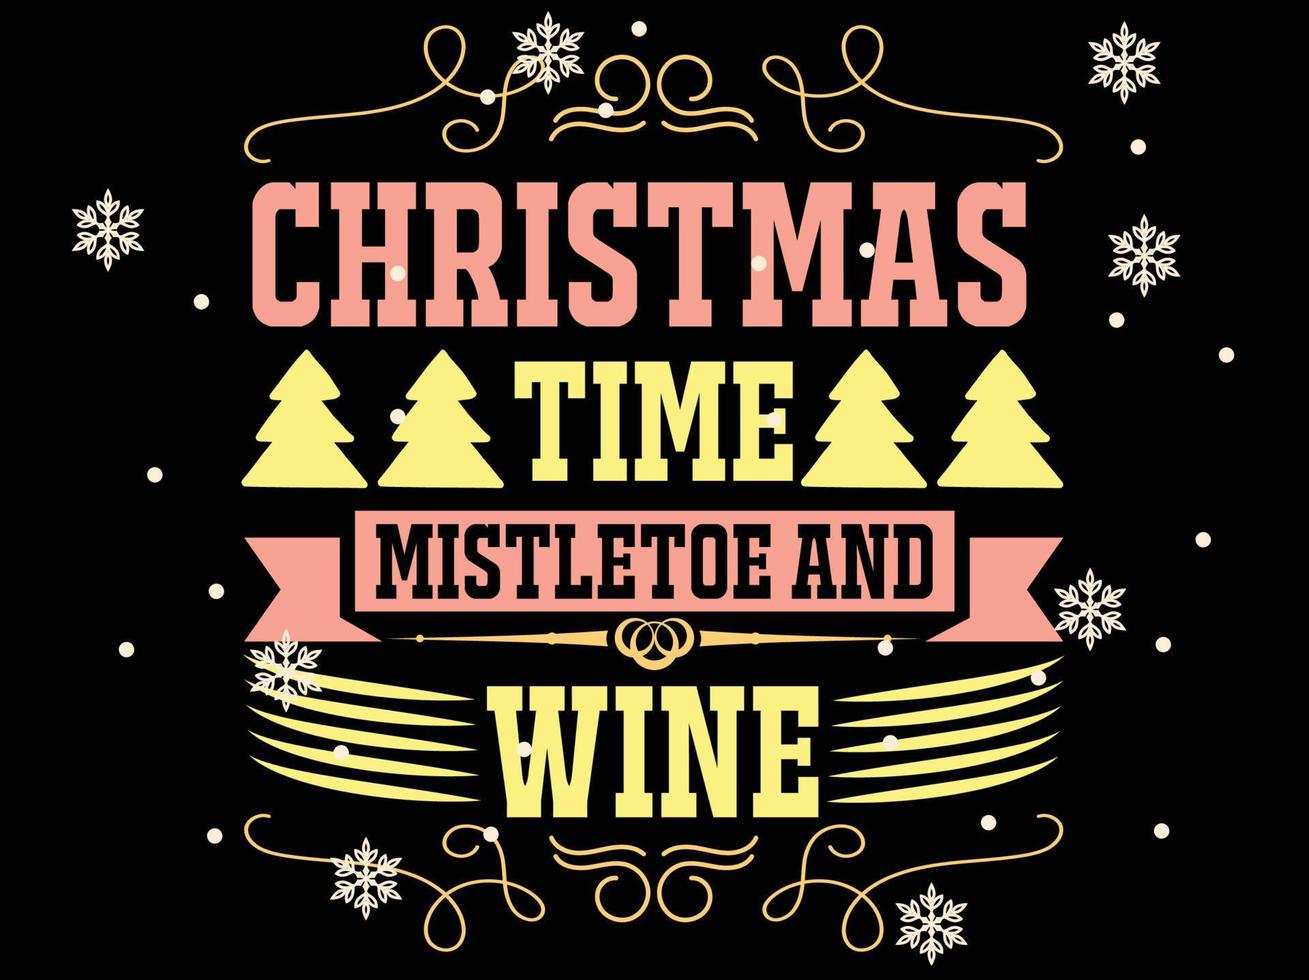 Christmas Time Mistletoe and Wine 05 Merry Christmas and Happy Holidays Typography set vector